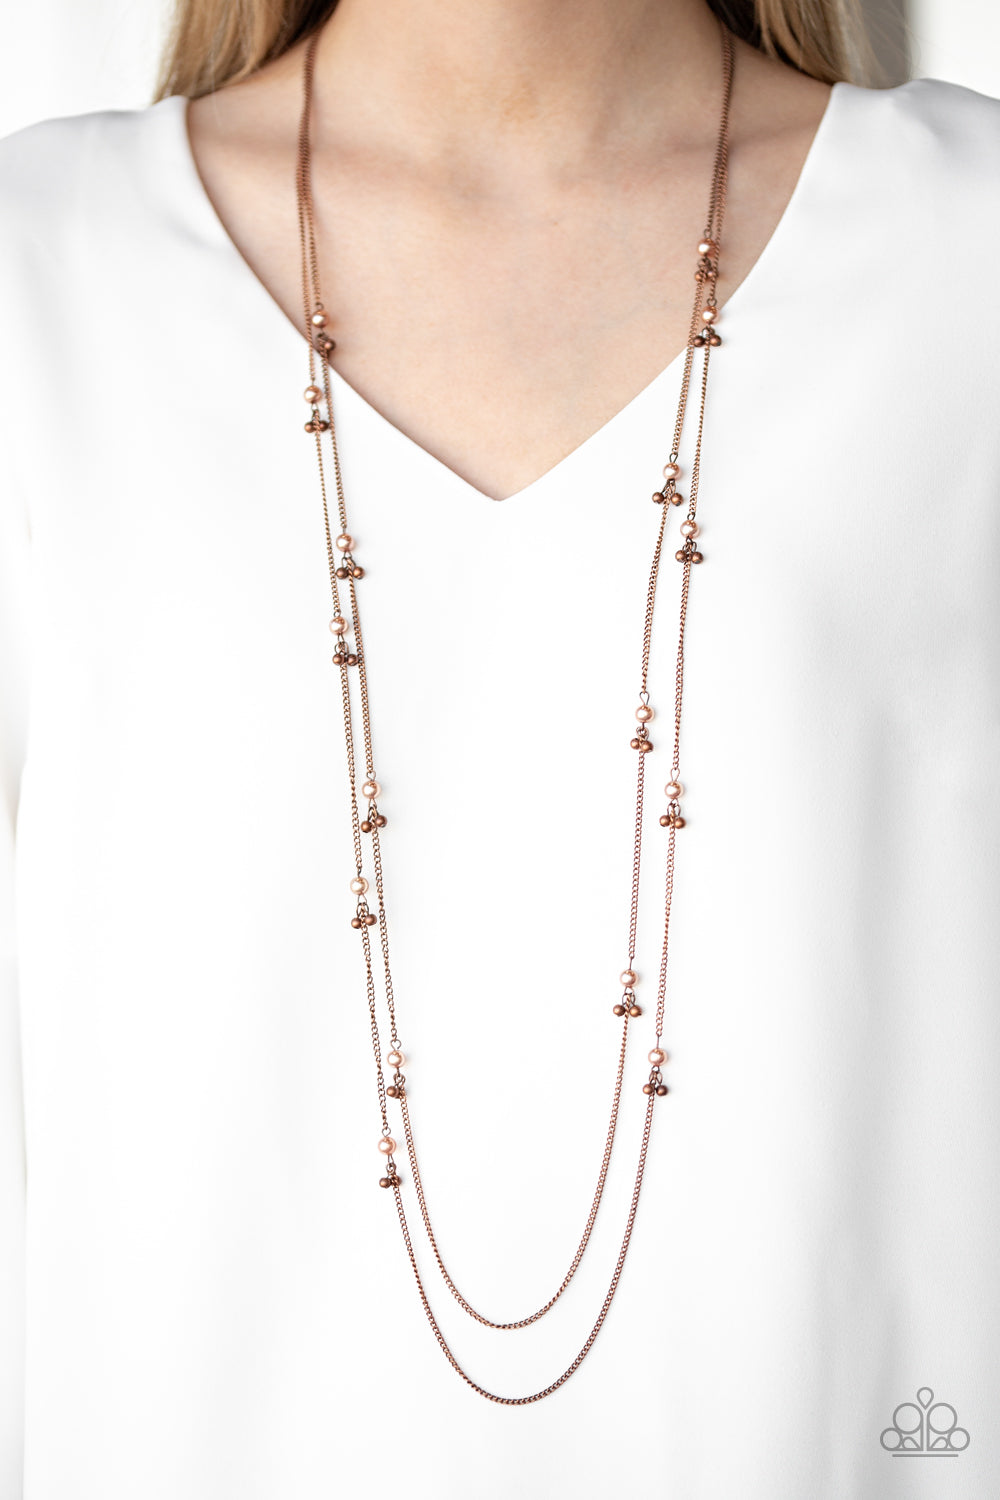 Paparazzi Ultrawealthy Copper Long Necklace